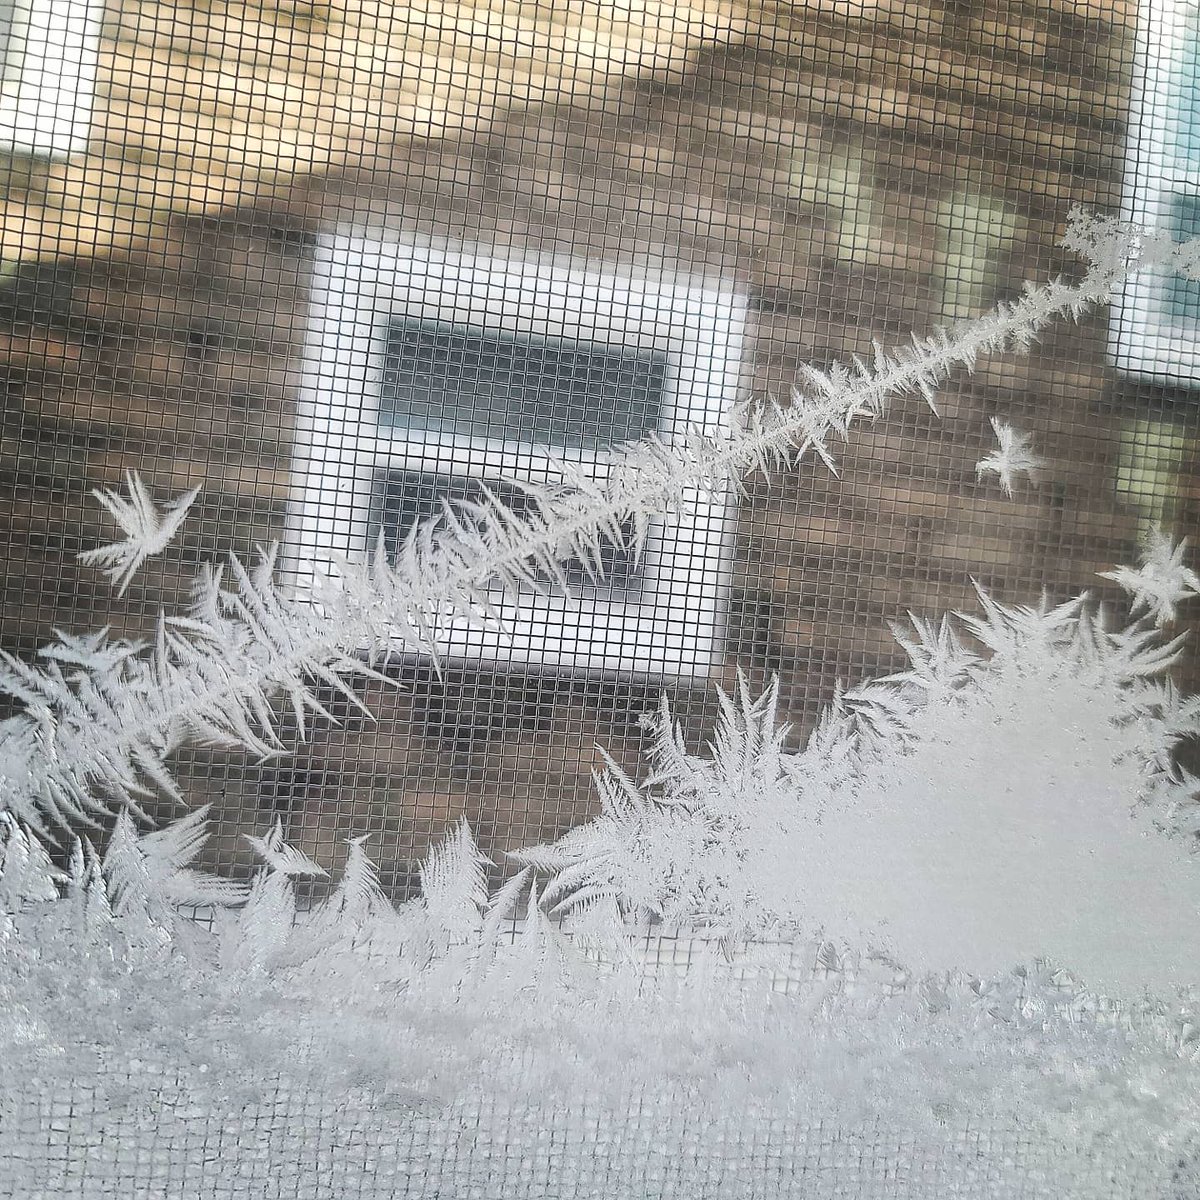 The frost on the windows for the past 4 days...
#winterinNebraska